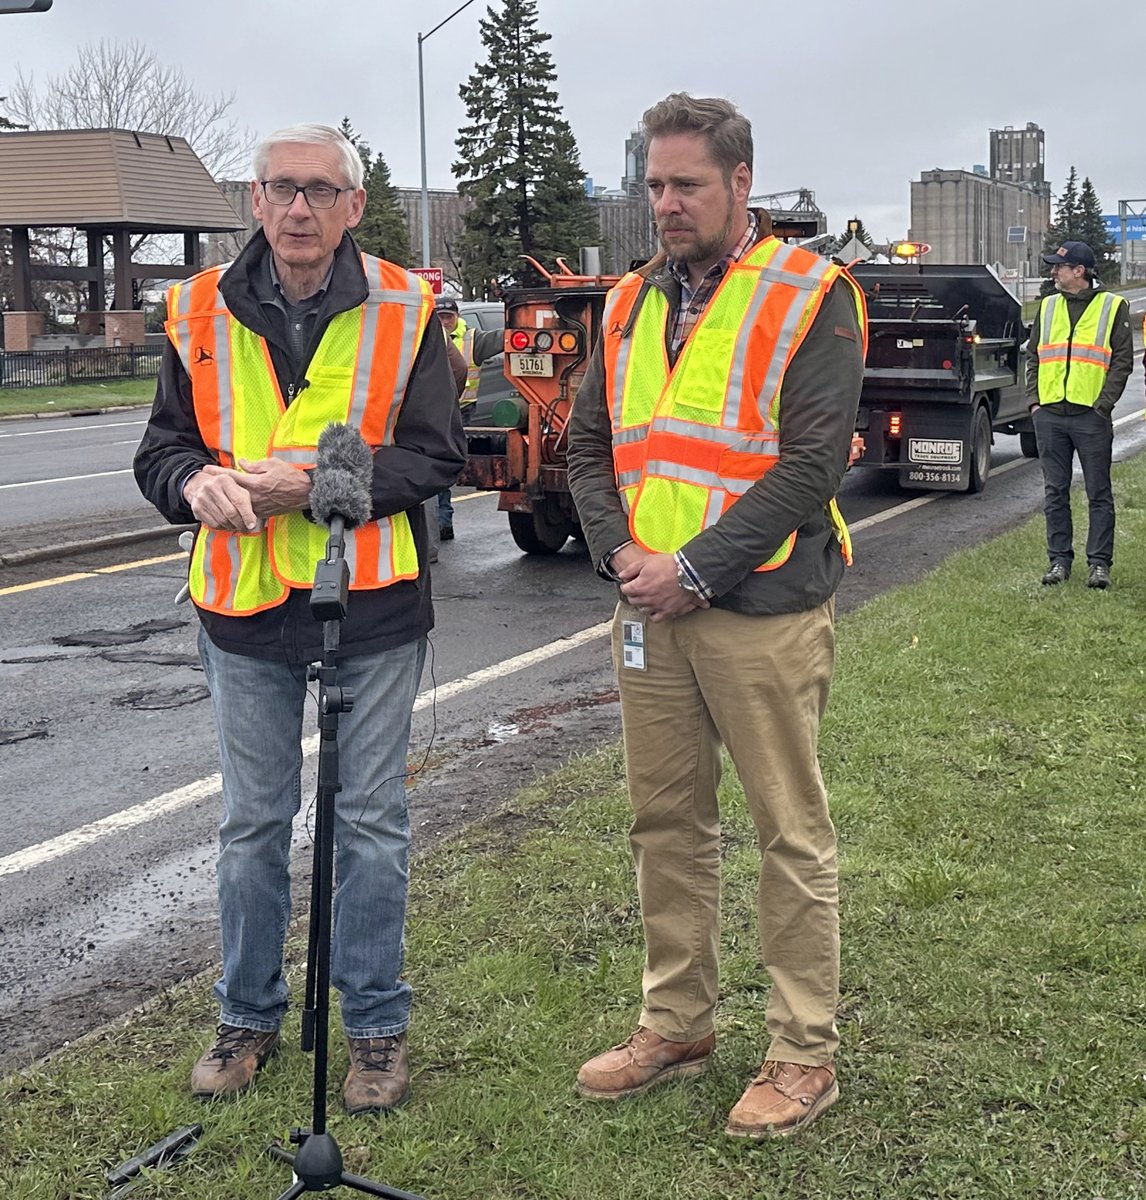 Great day to be in Superior for our next round of #PotholePatrol with @GovEvers. We’re fixing roads and #WorkingForYou across the state!